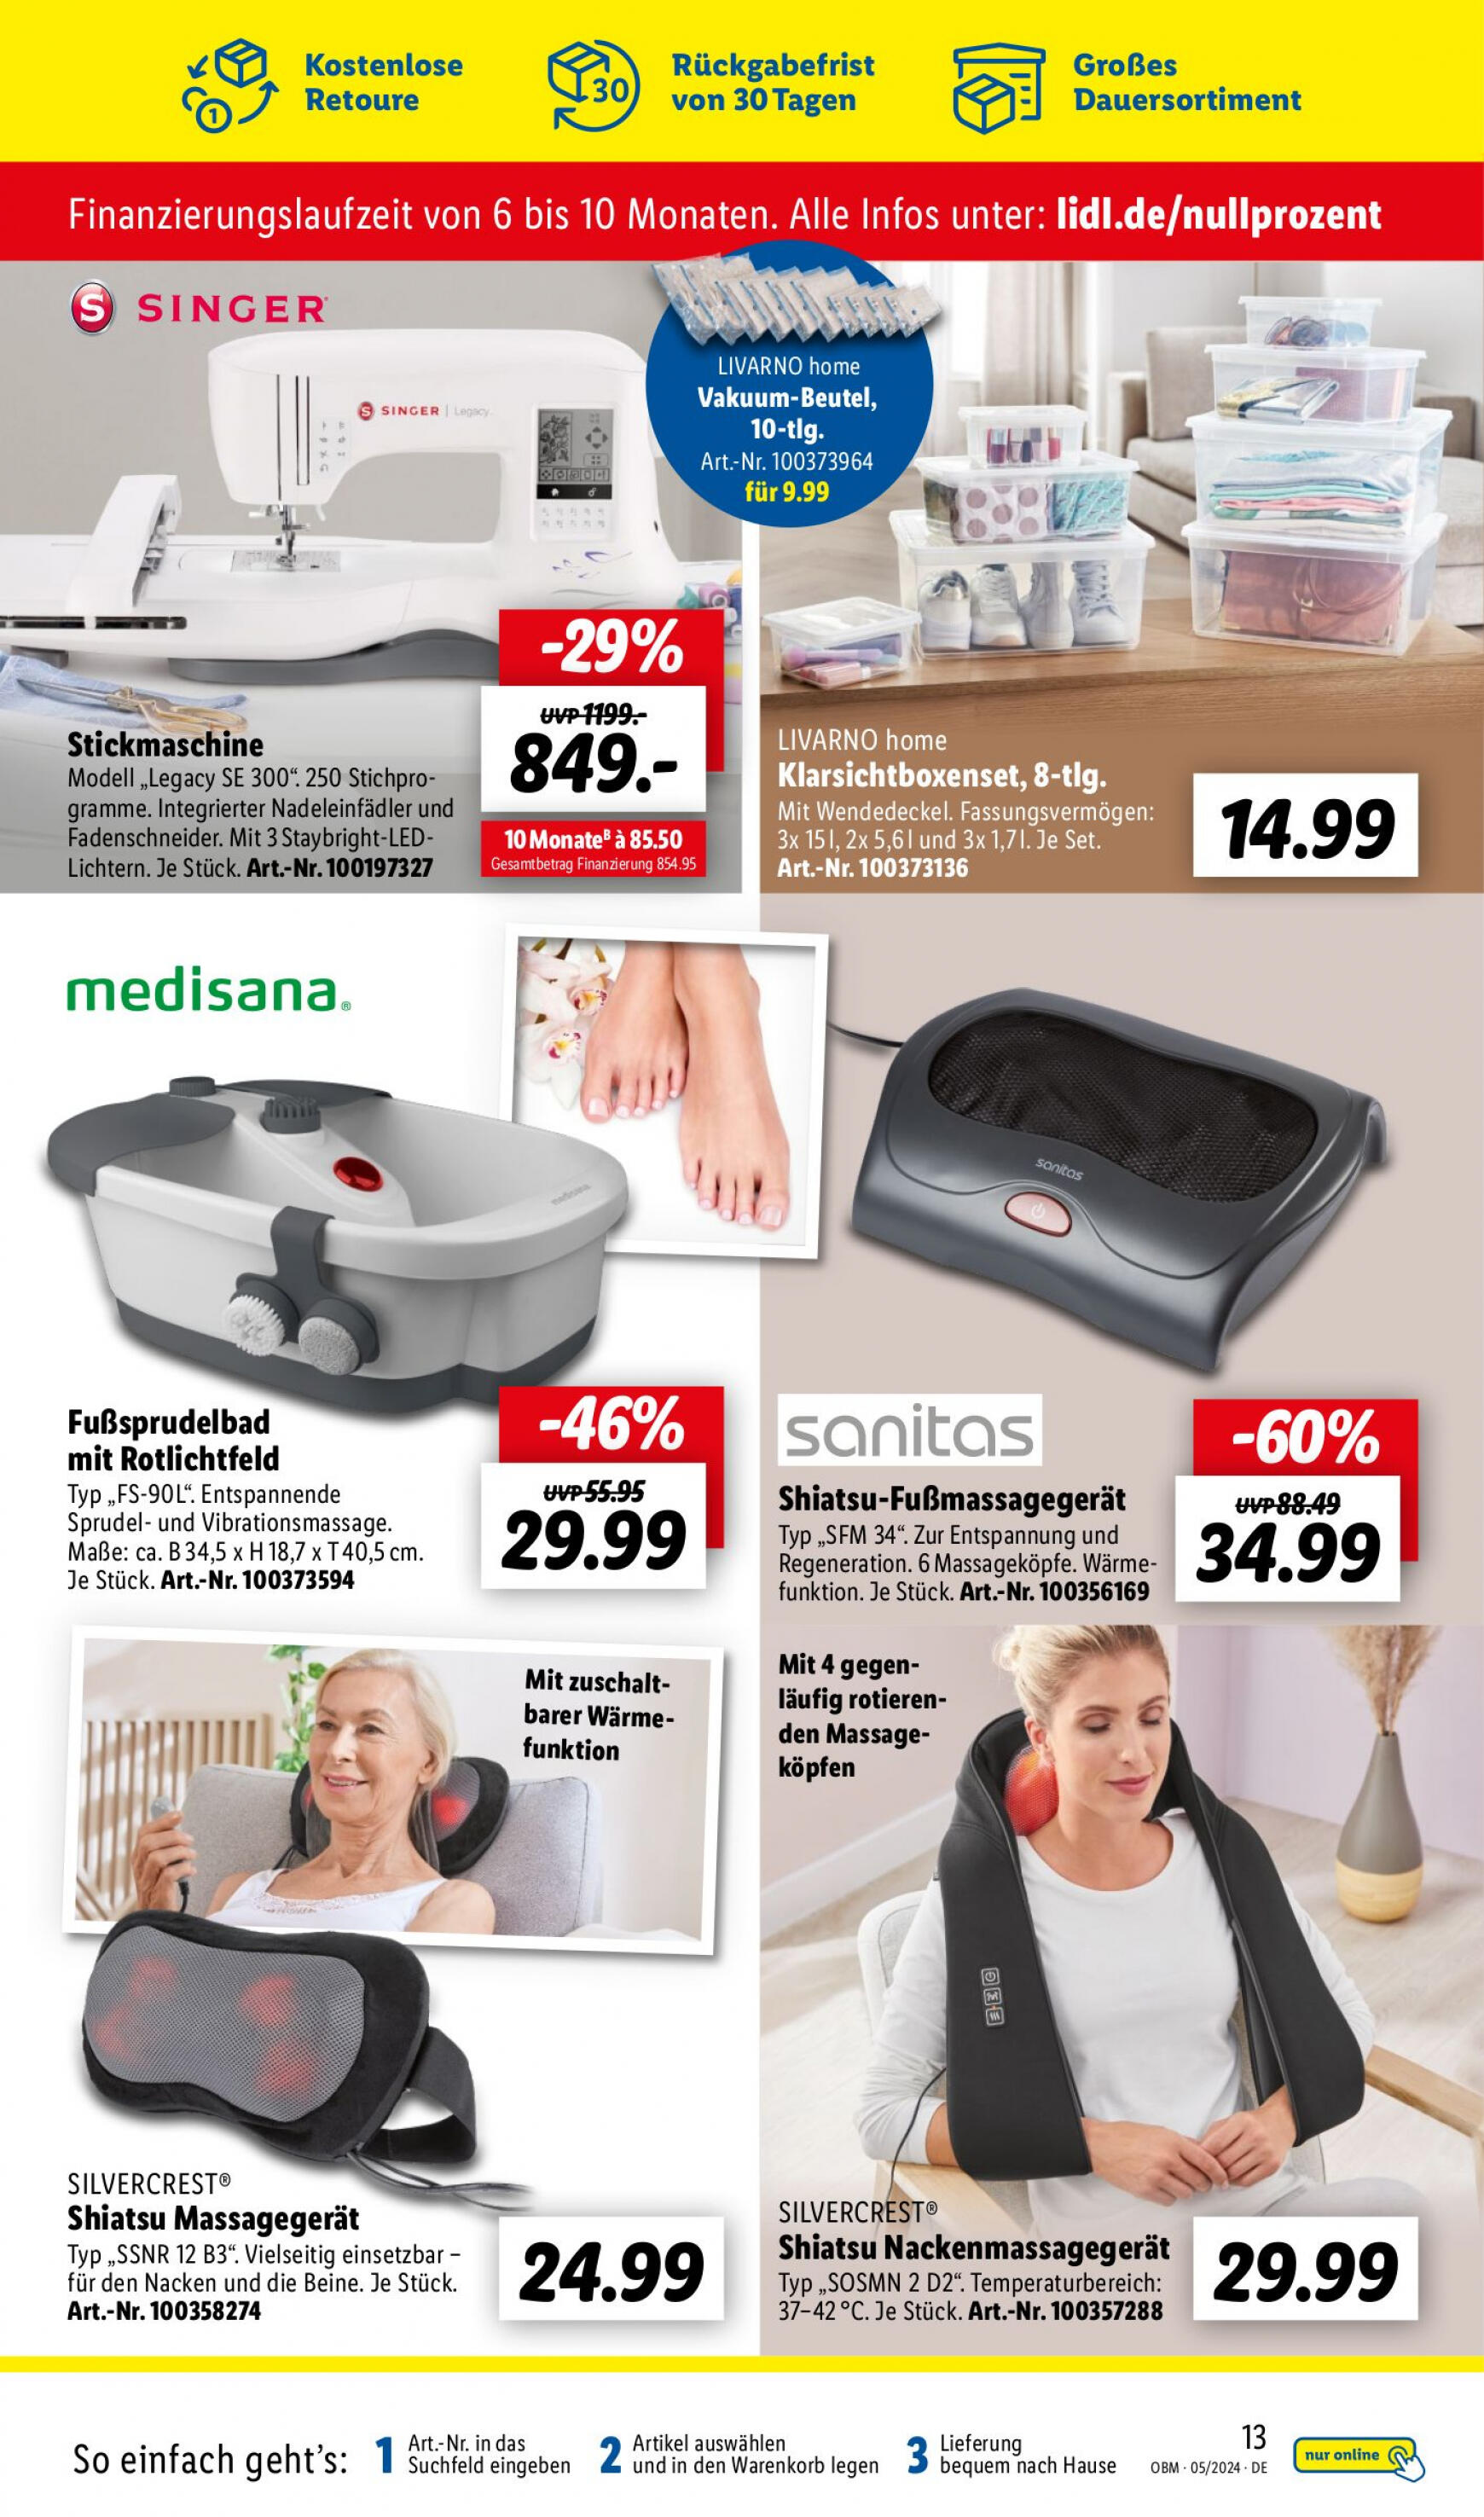 lidl - Flyer Lidl - Aktuelle Onlineshop-Highlights aktuell 01.05. - 31.05. - page: 13